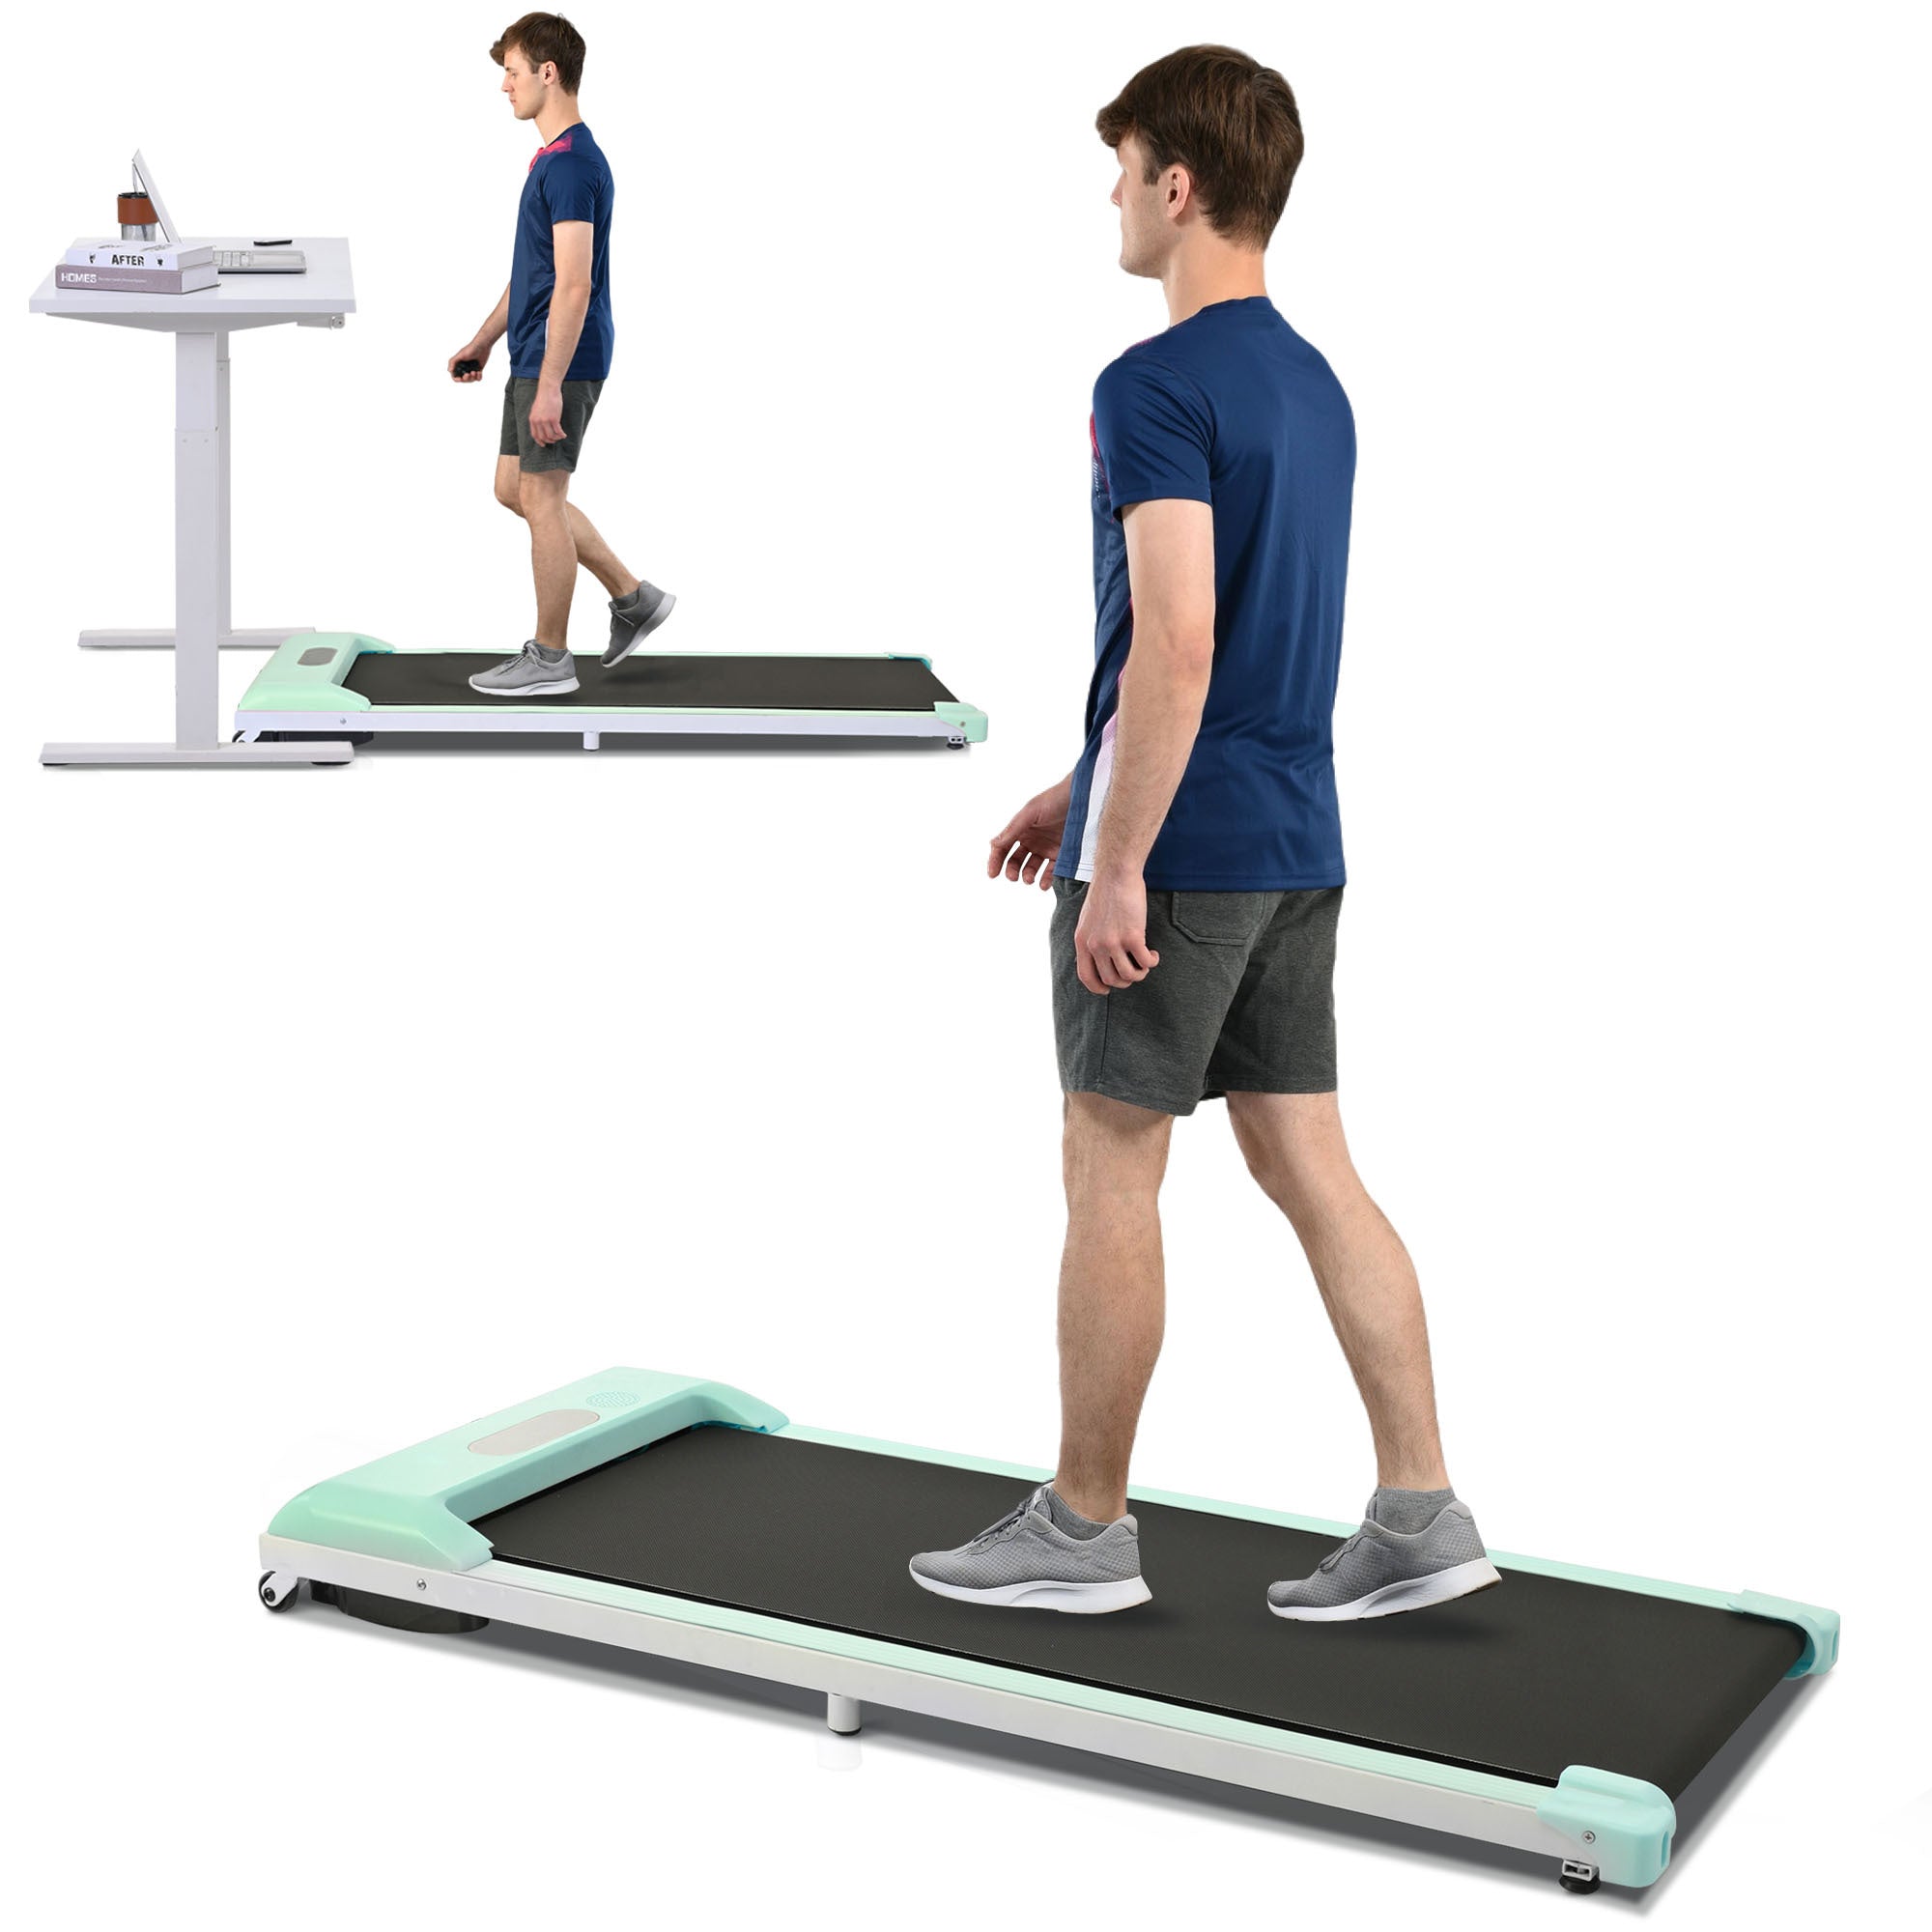 2 in 1 Under Desk Electric Treadmill 2.5HP, with green-metal